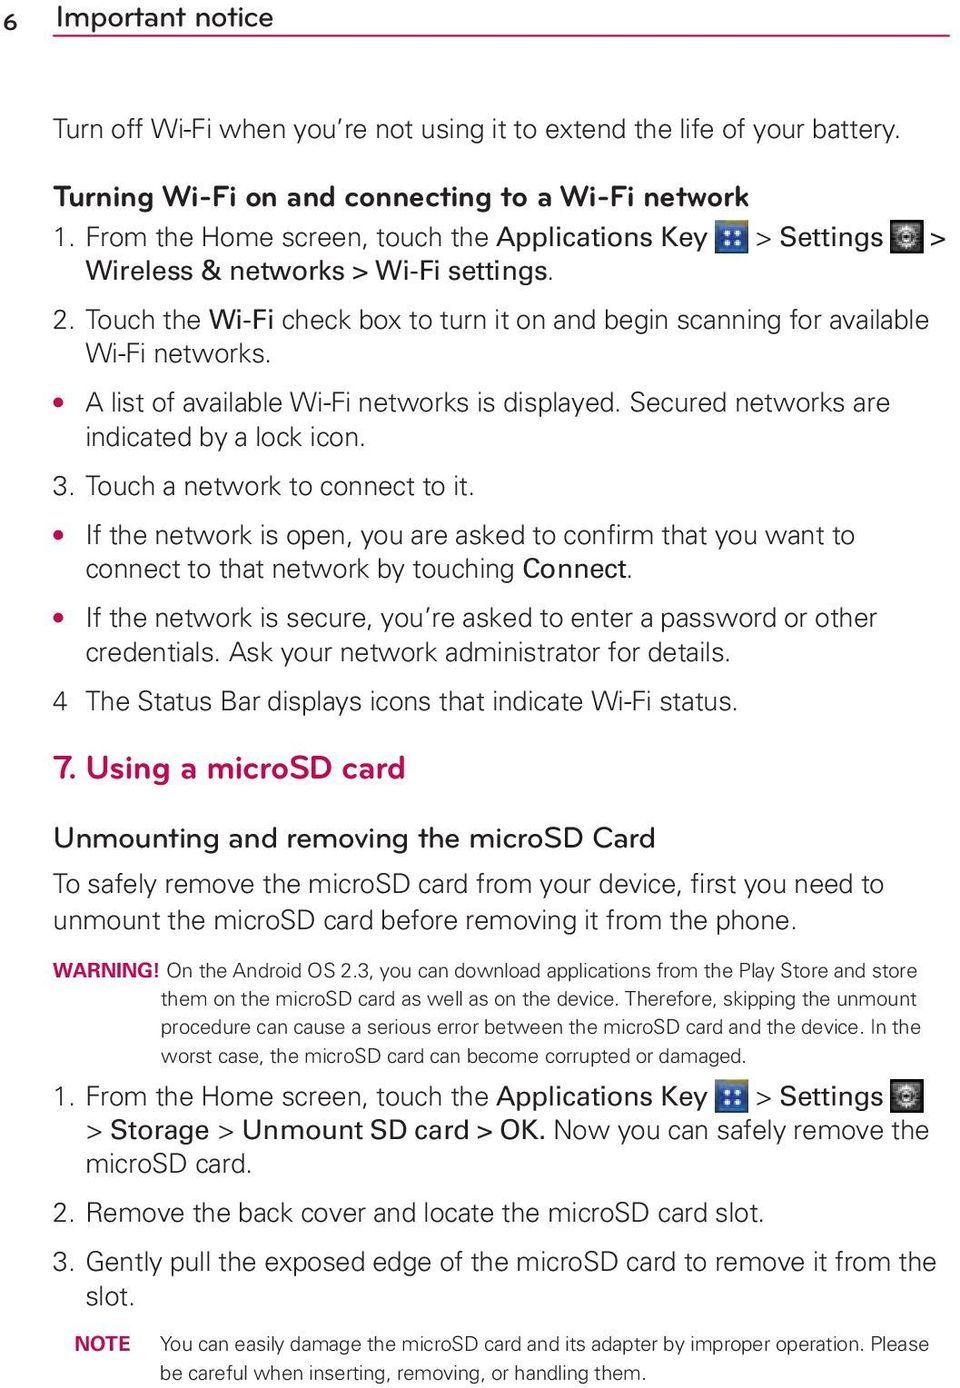 A list of available Wi-Fi networks is displayed. Secured networks are indicated by a lock icon. 3. Touch a network to connect to it.